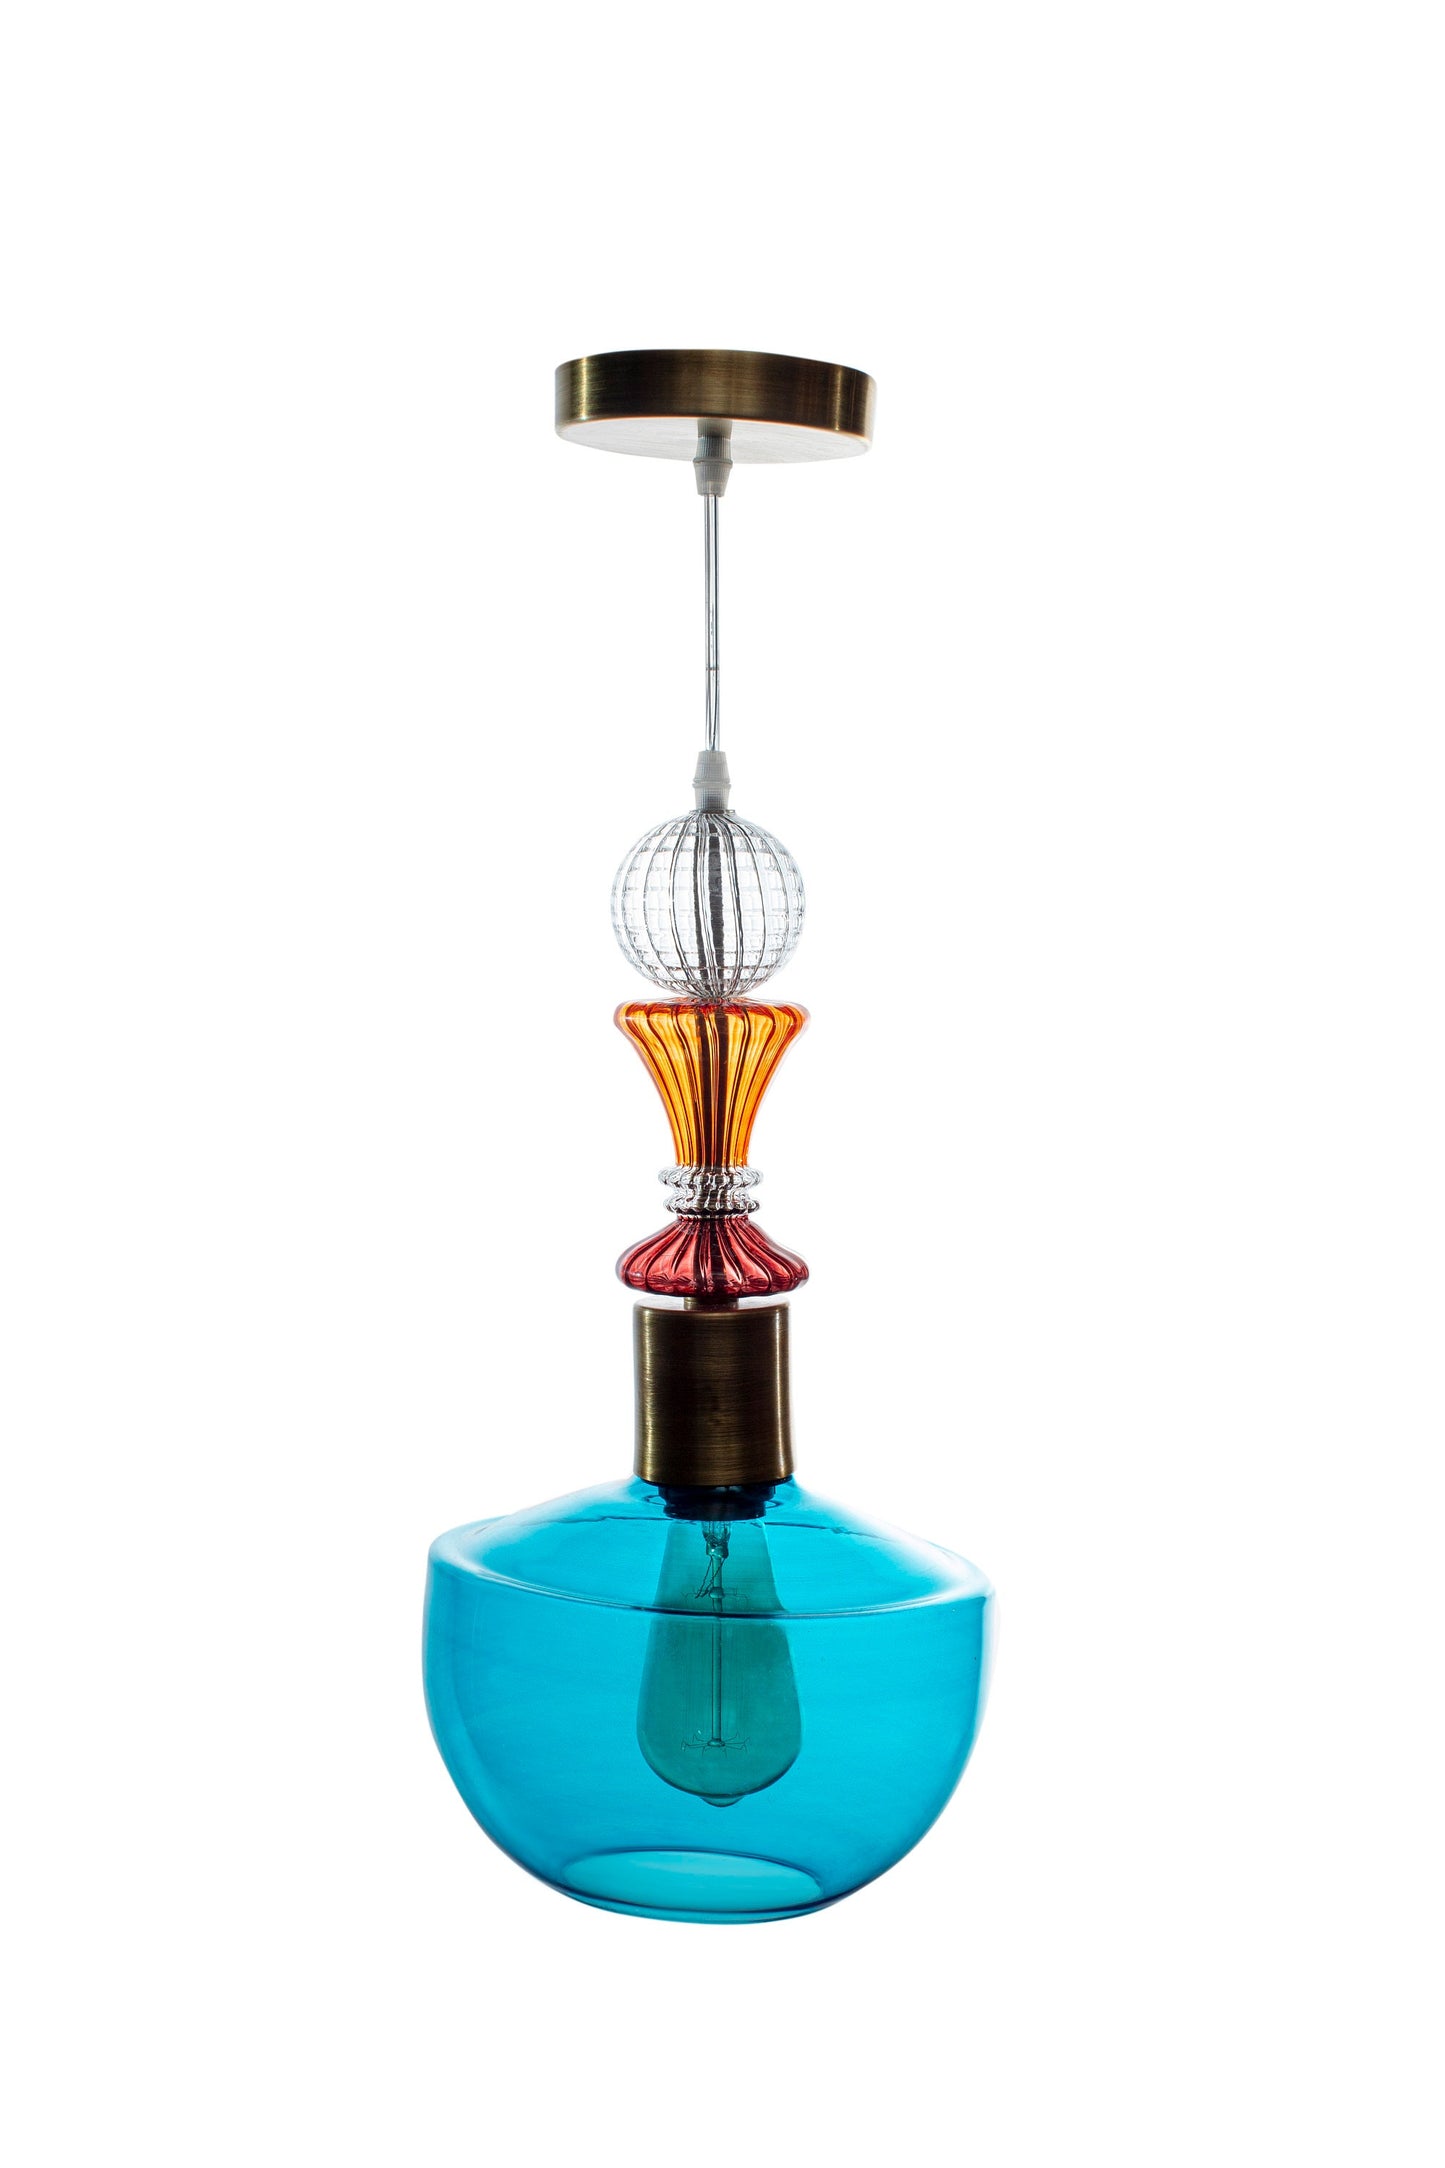 Multicolored Handmade Modern Ceiling Light for Home & Office Decoration - Les Trois Pyramides 